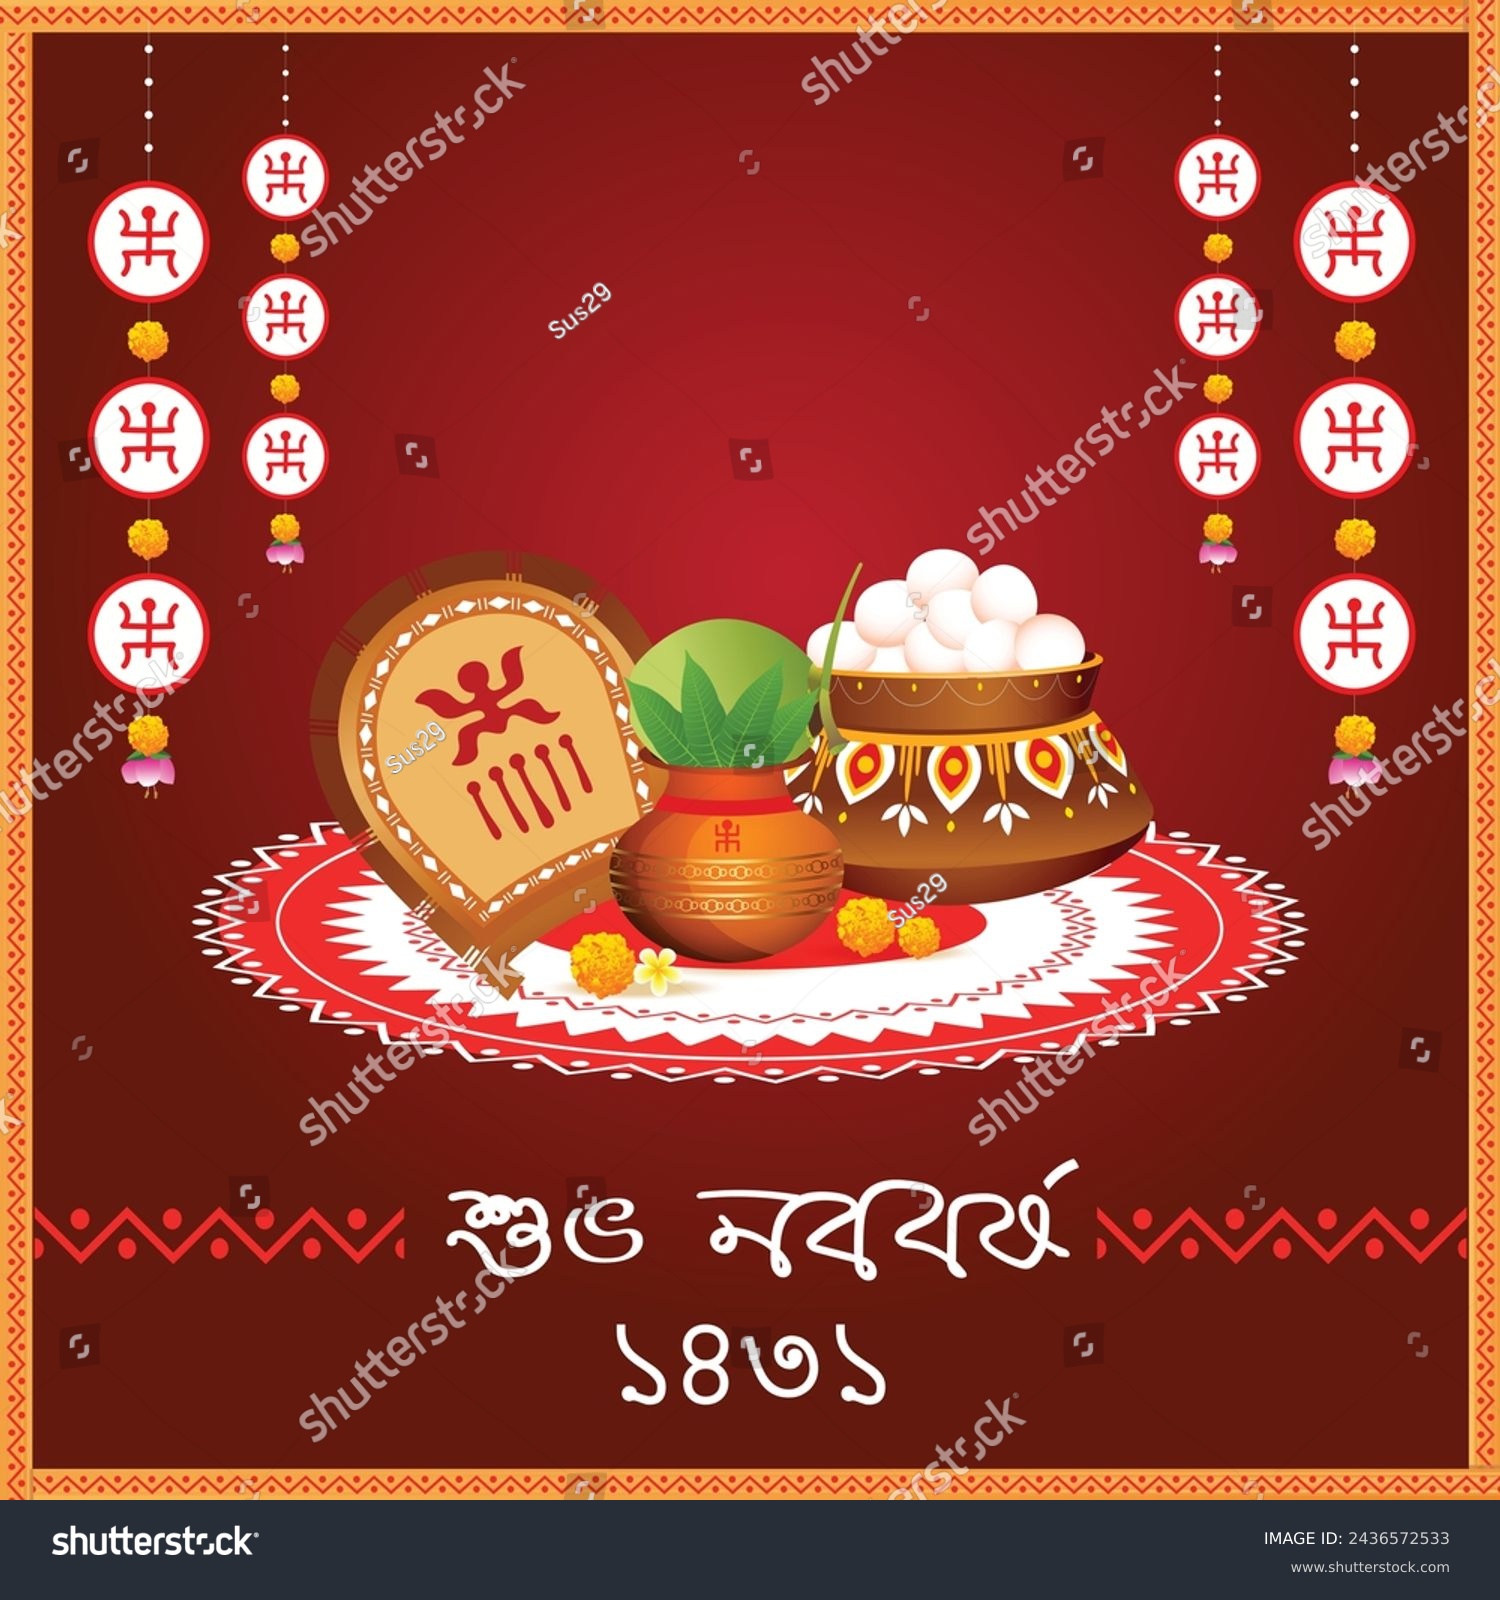 SVG of Bengali new year with Bengali text Subho Nababa svg